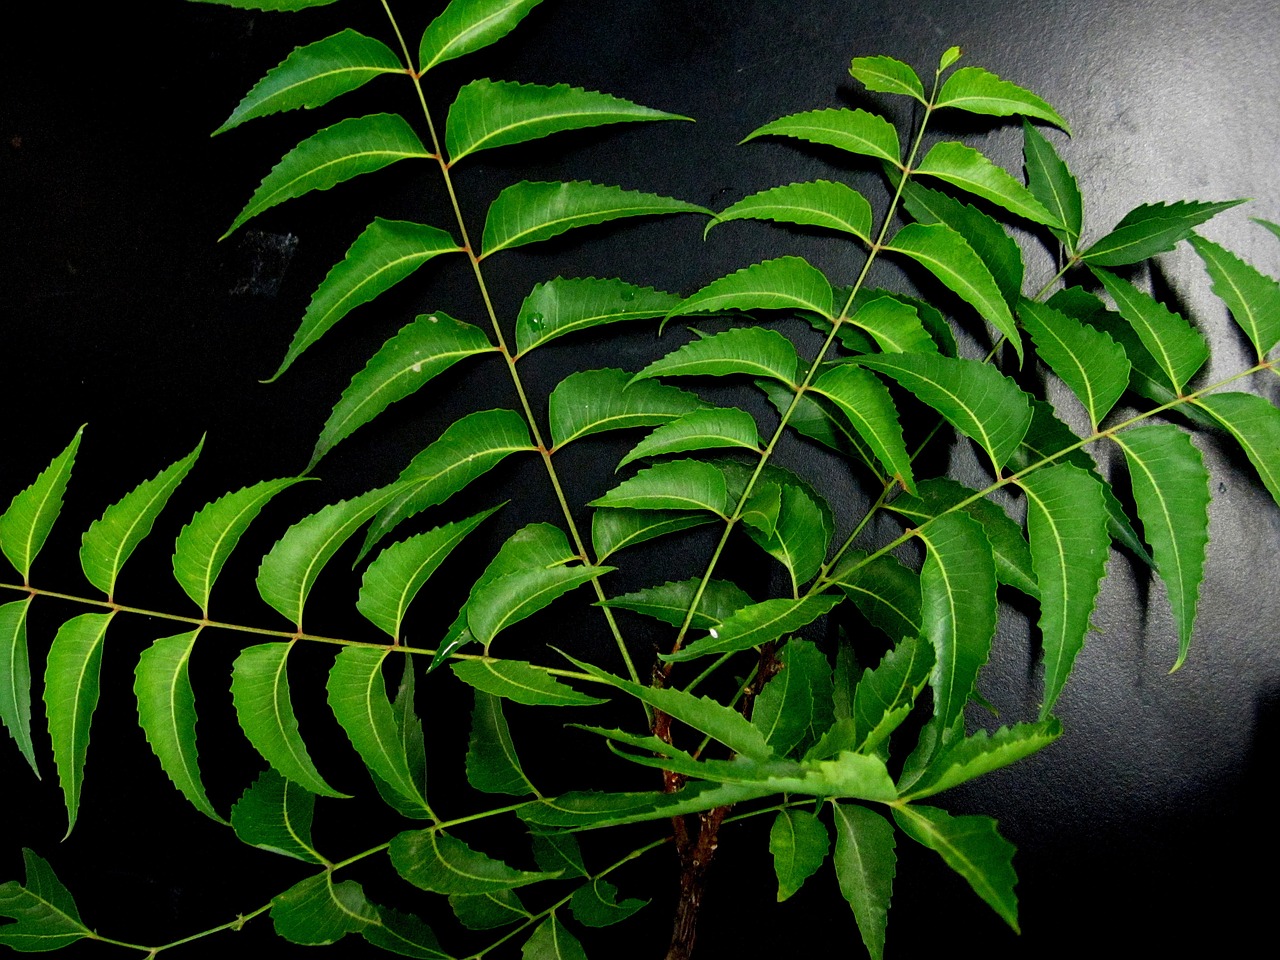 Indian Scientists Find Out How Neem Cells Produce Useful Chemicals